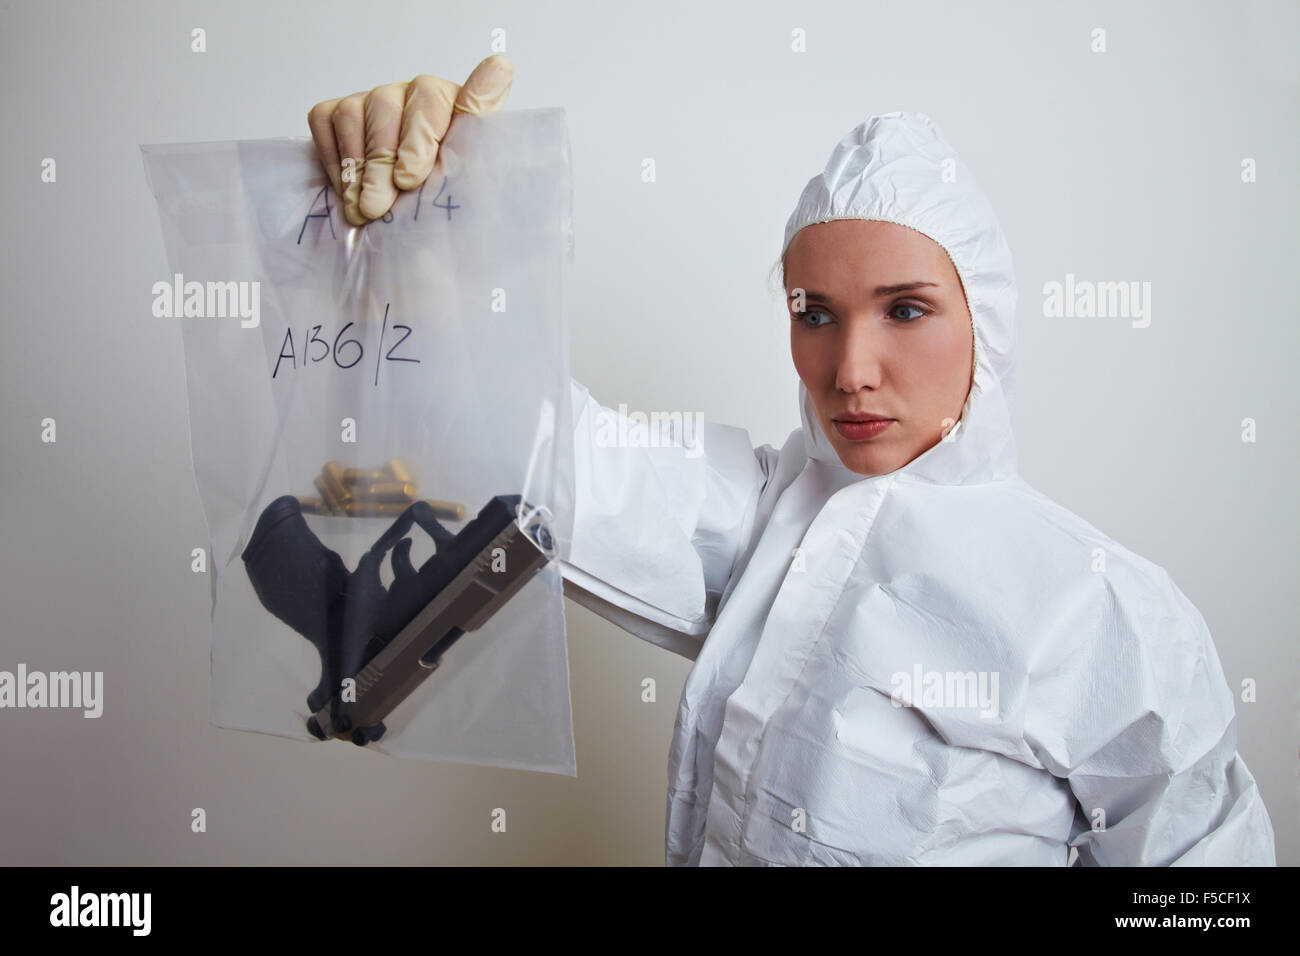 Female forensic scientist holding weapon and ammunition Stock Photo